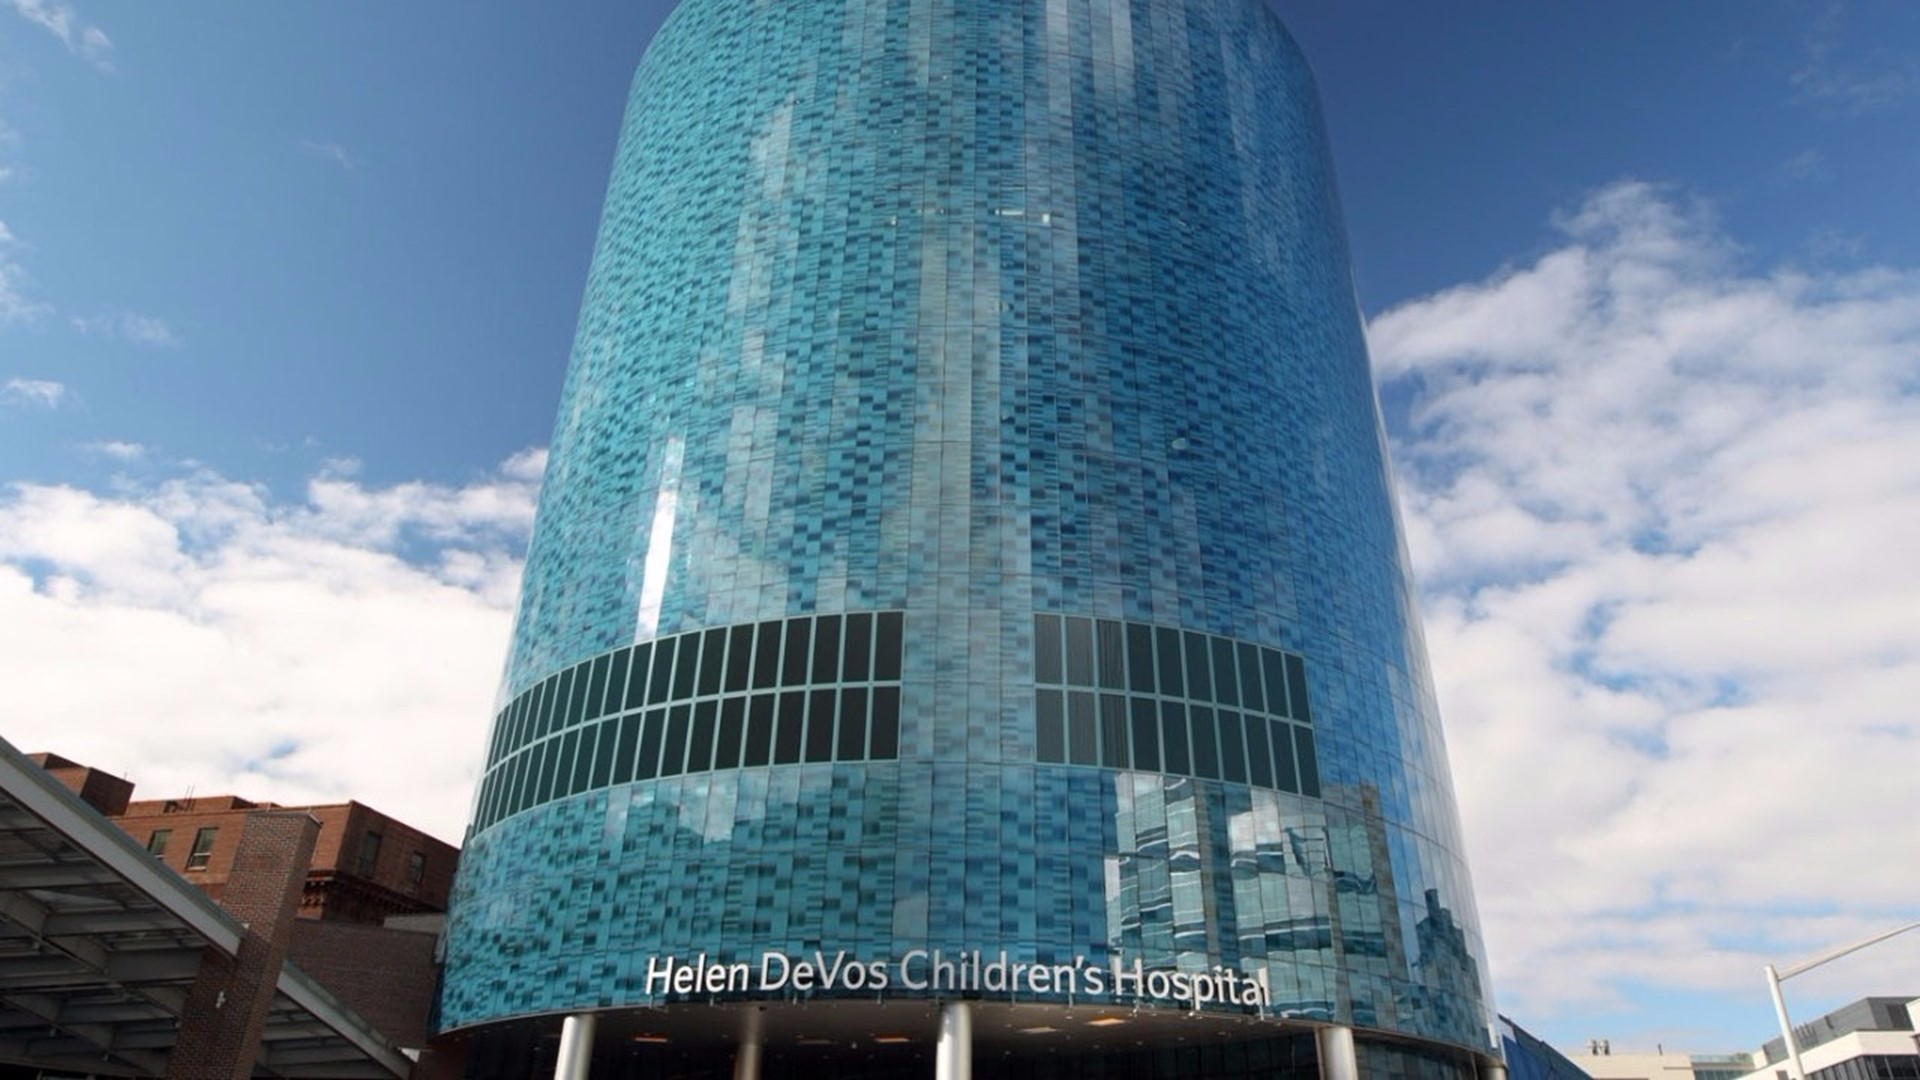 U.S. News and World Report recognizes the top 50 children’s hospitals in the nation every year and Grand Rapids’ own Helen DeVos Children’s Hospital has ranked on this list for the past eight years. In 2019, the hospital earned a spot among the top hospitals in four categories